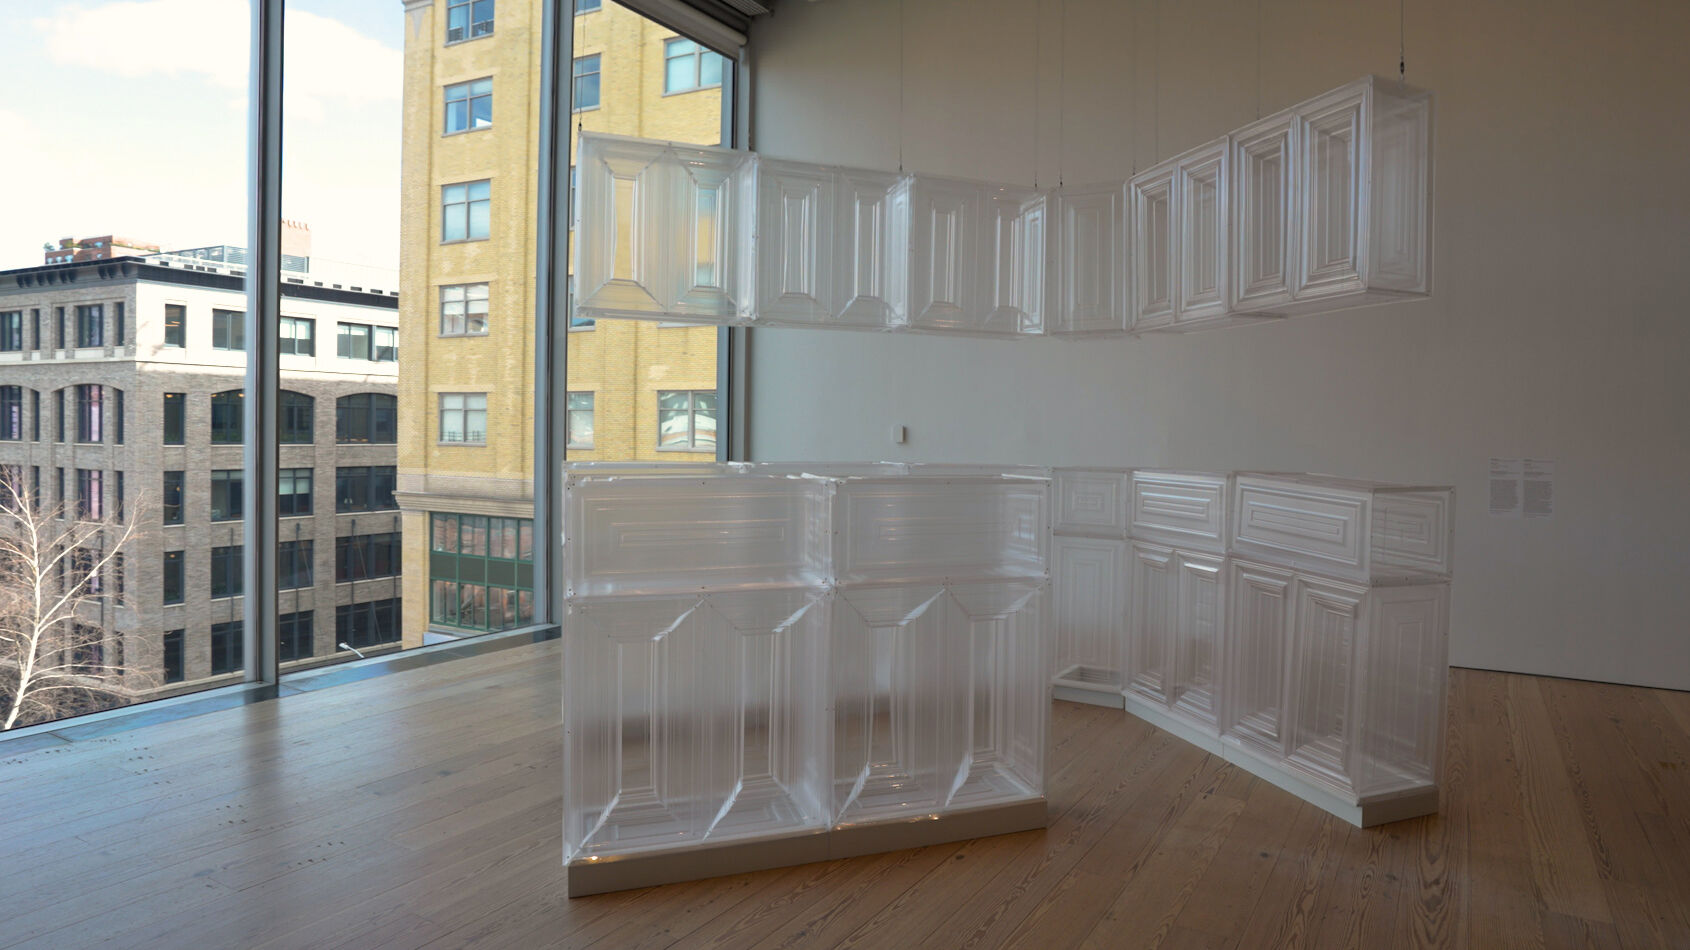 An arrangement of plastic constructs made to look like kitchen cabinets. 